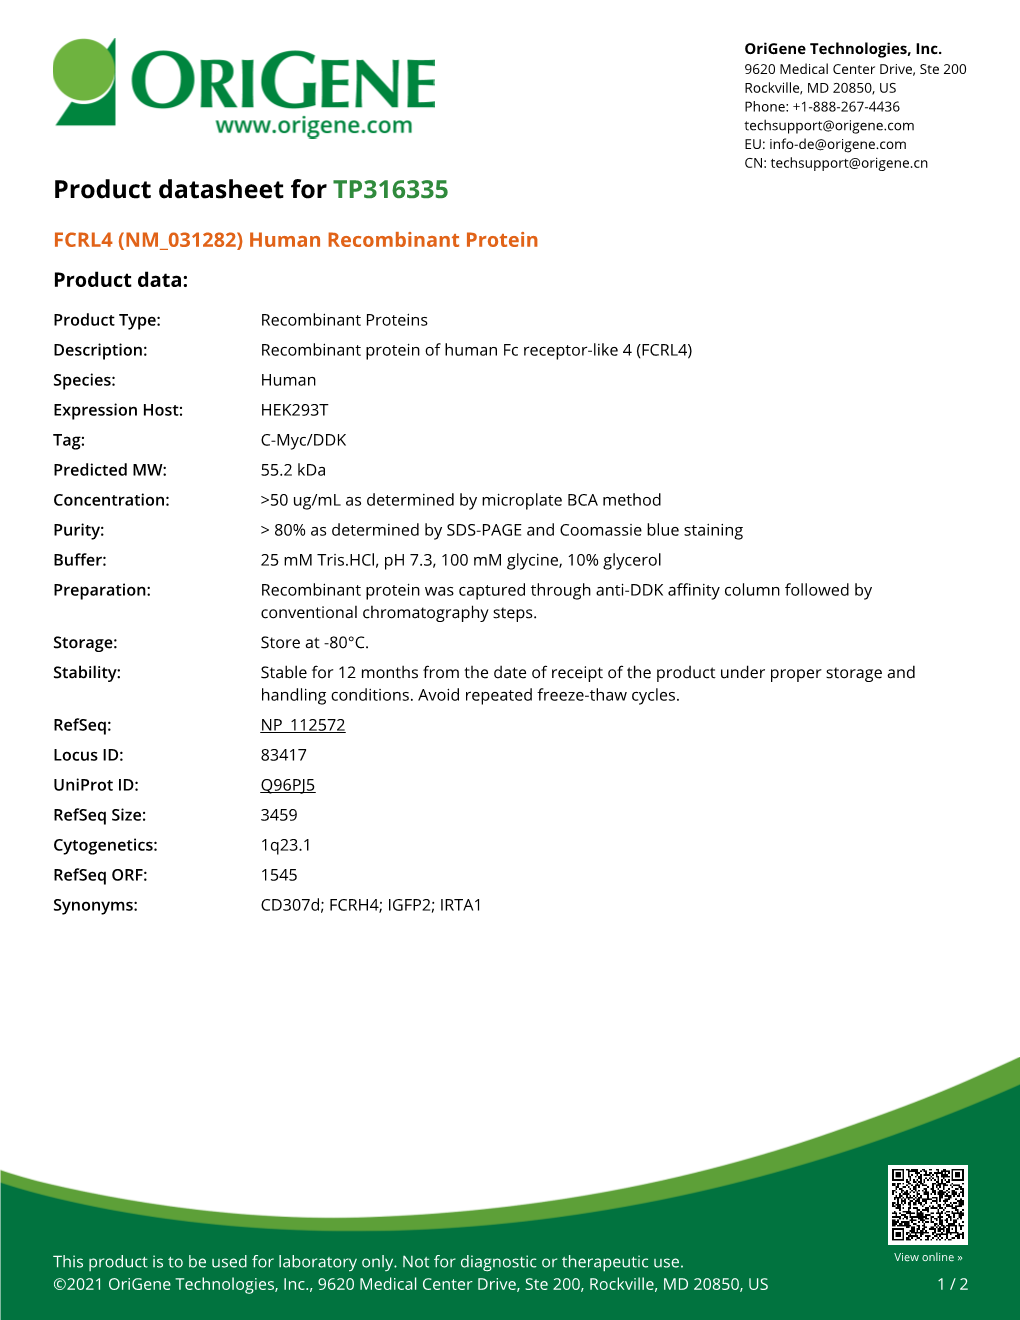 FCRL4 (NM 031282) Human Recombinant Protein – TP316335